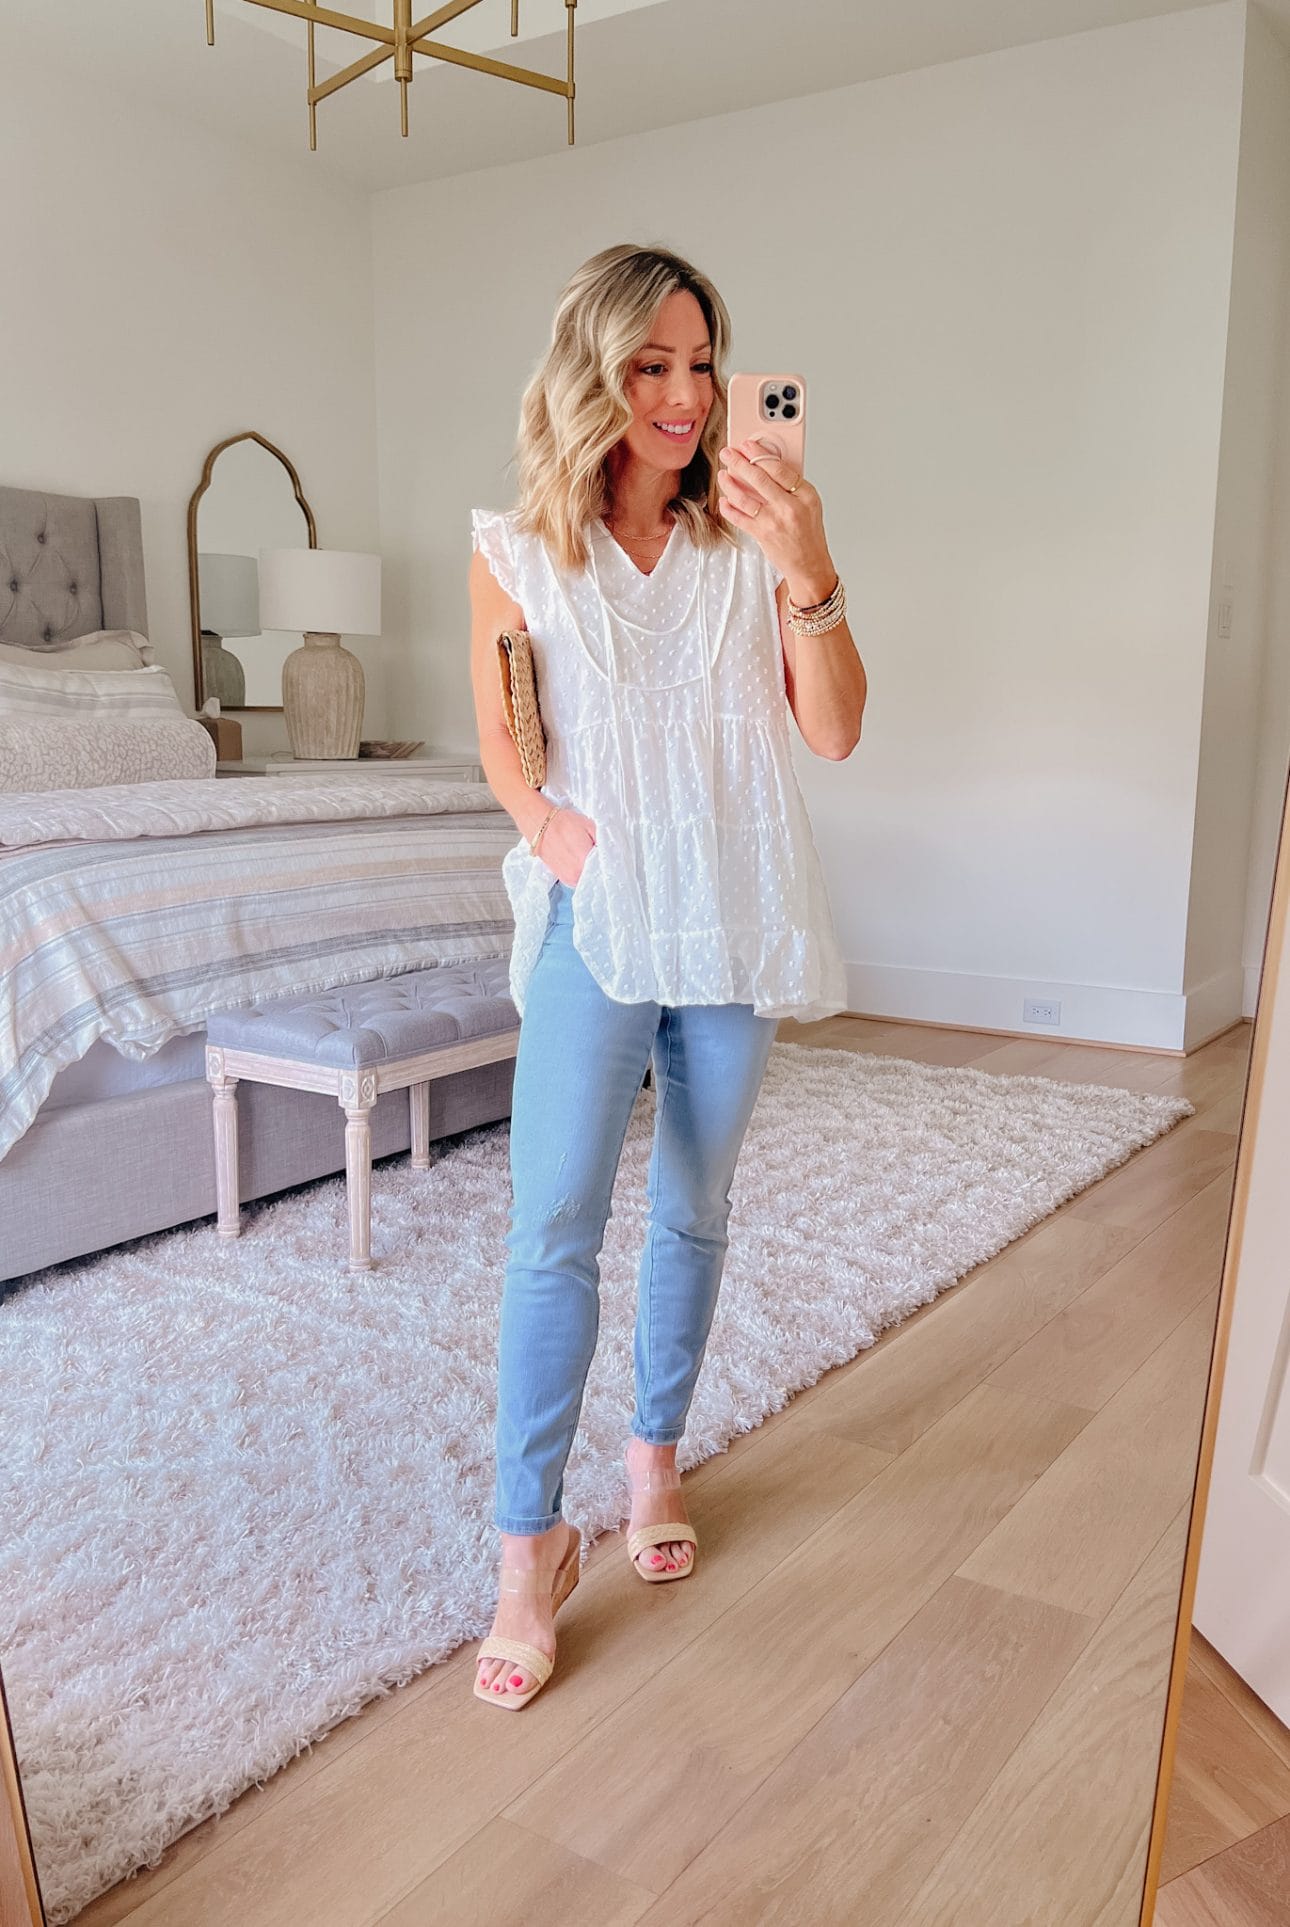 Swing Top, Jeans, Sandals 